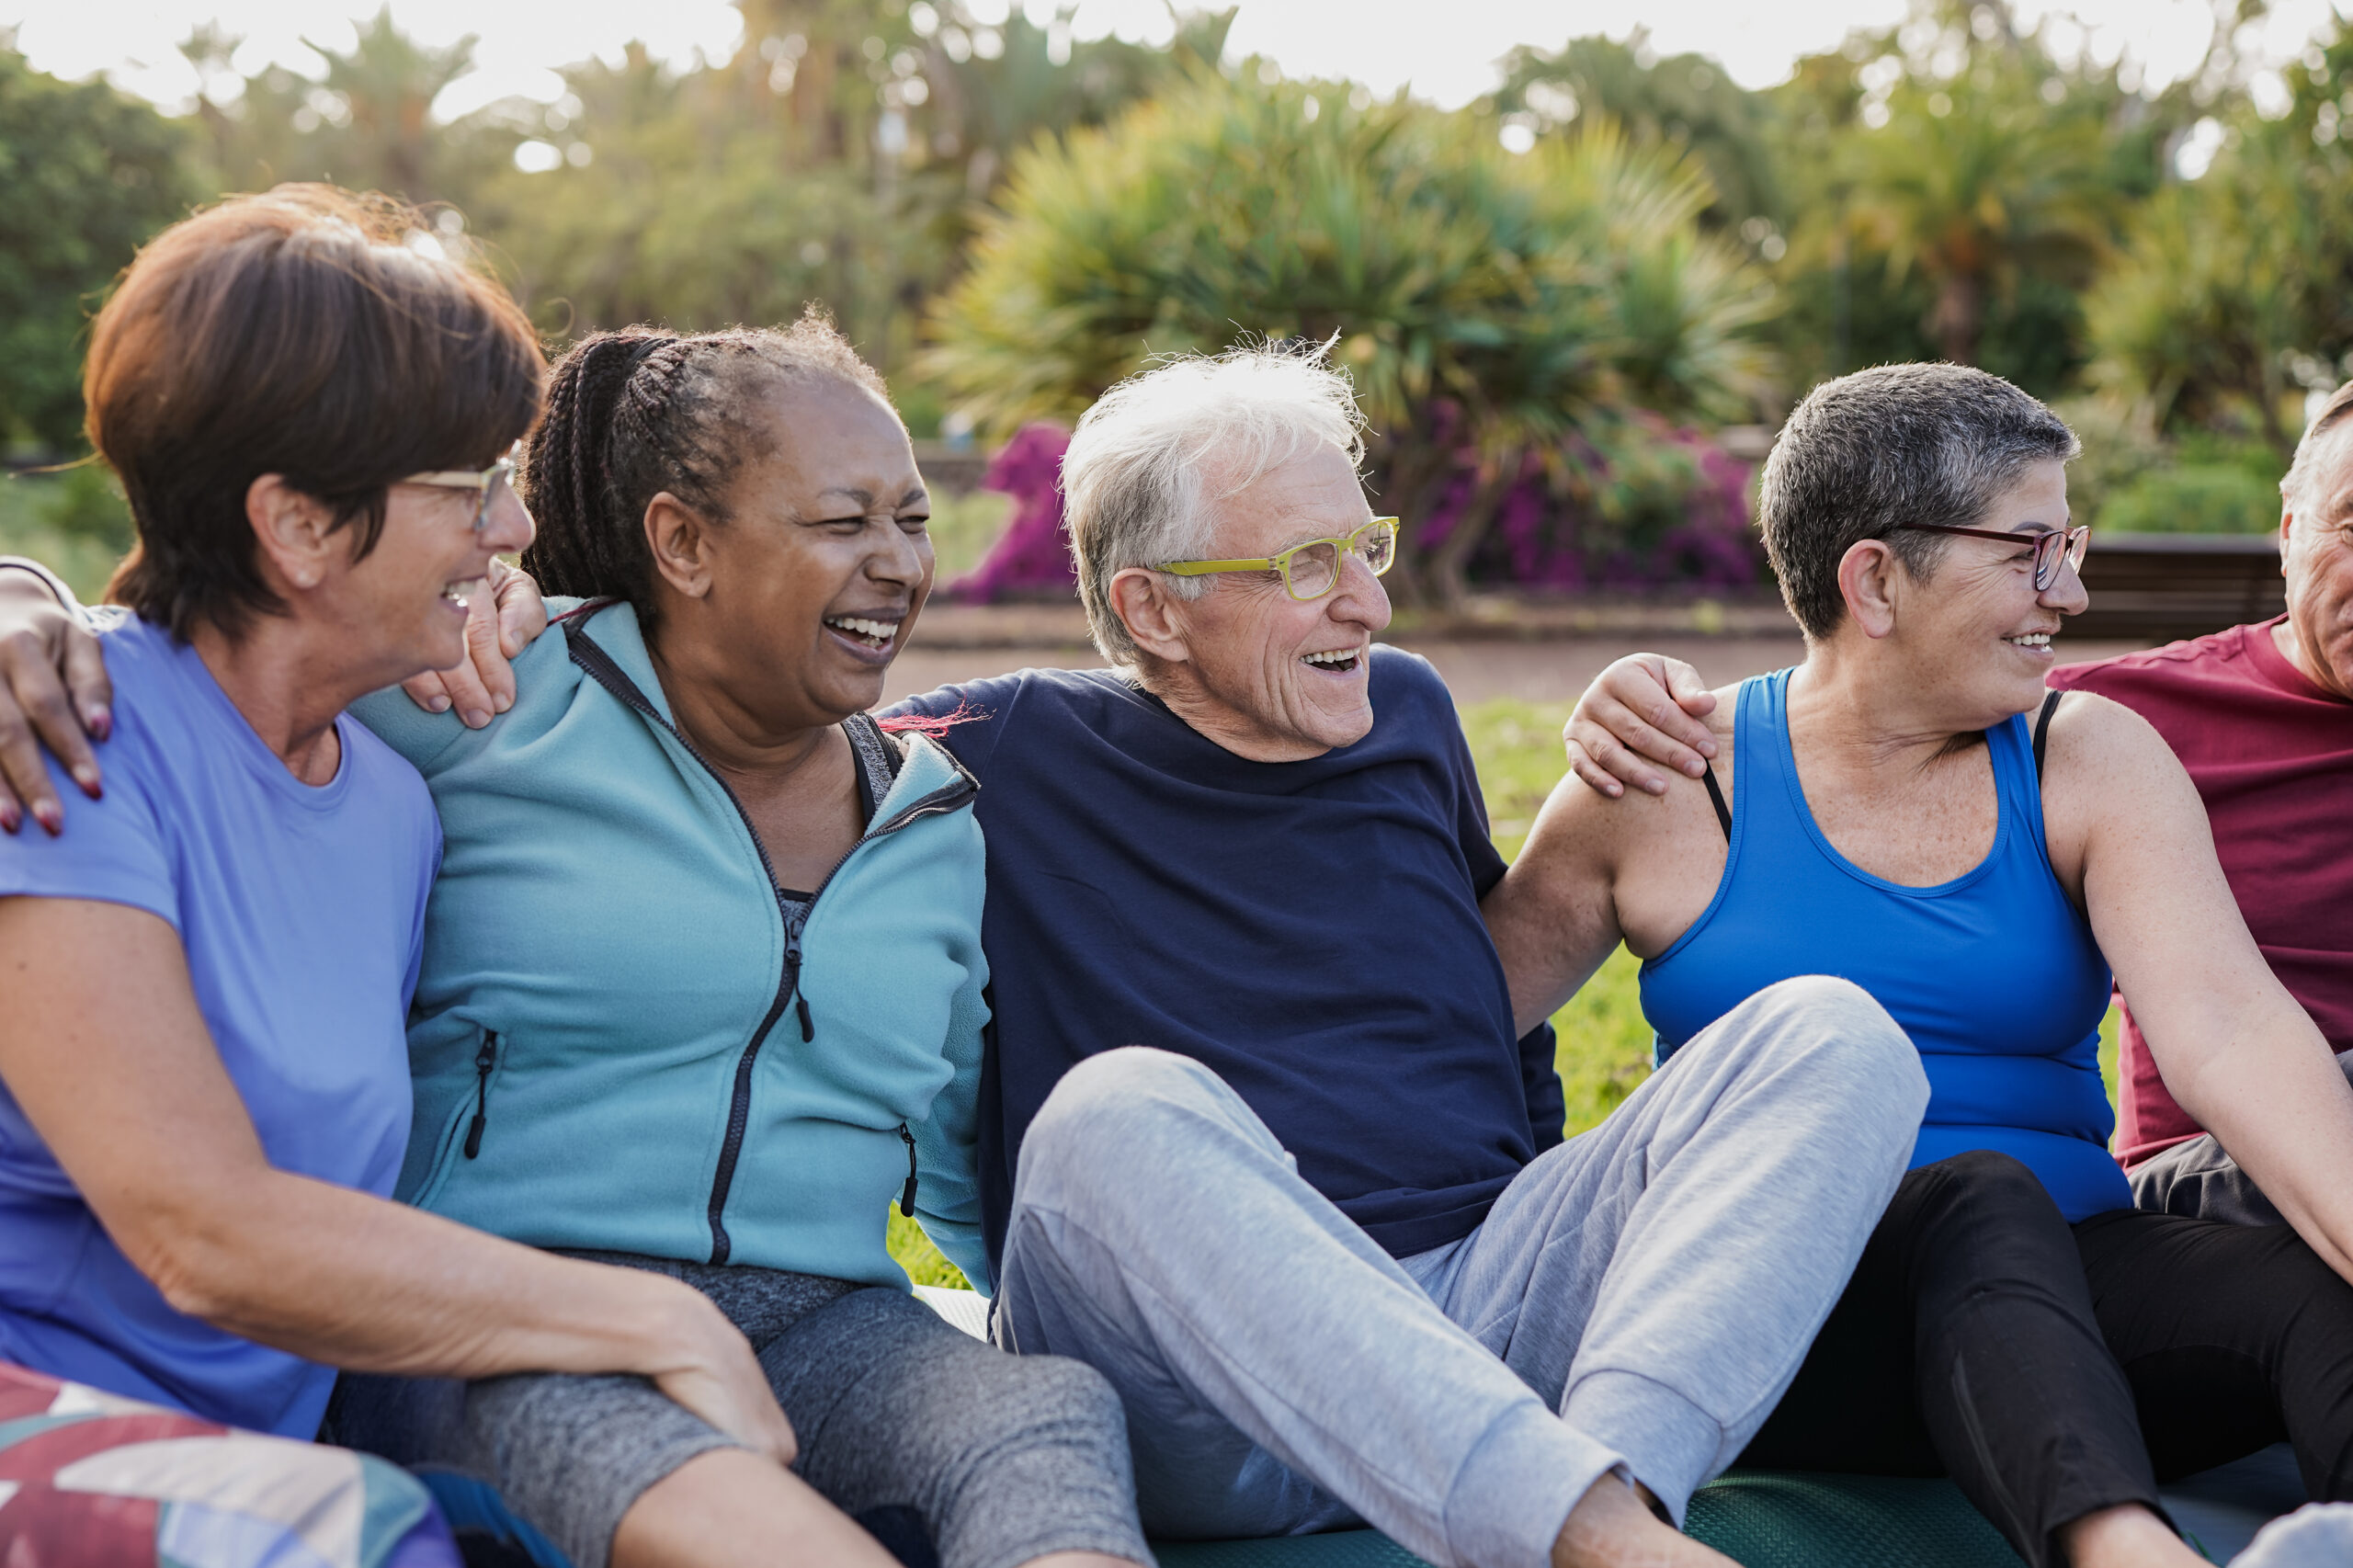 Senior friends having fun together at park after yoga exercise class